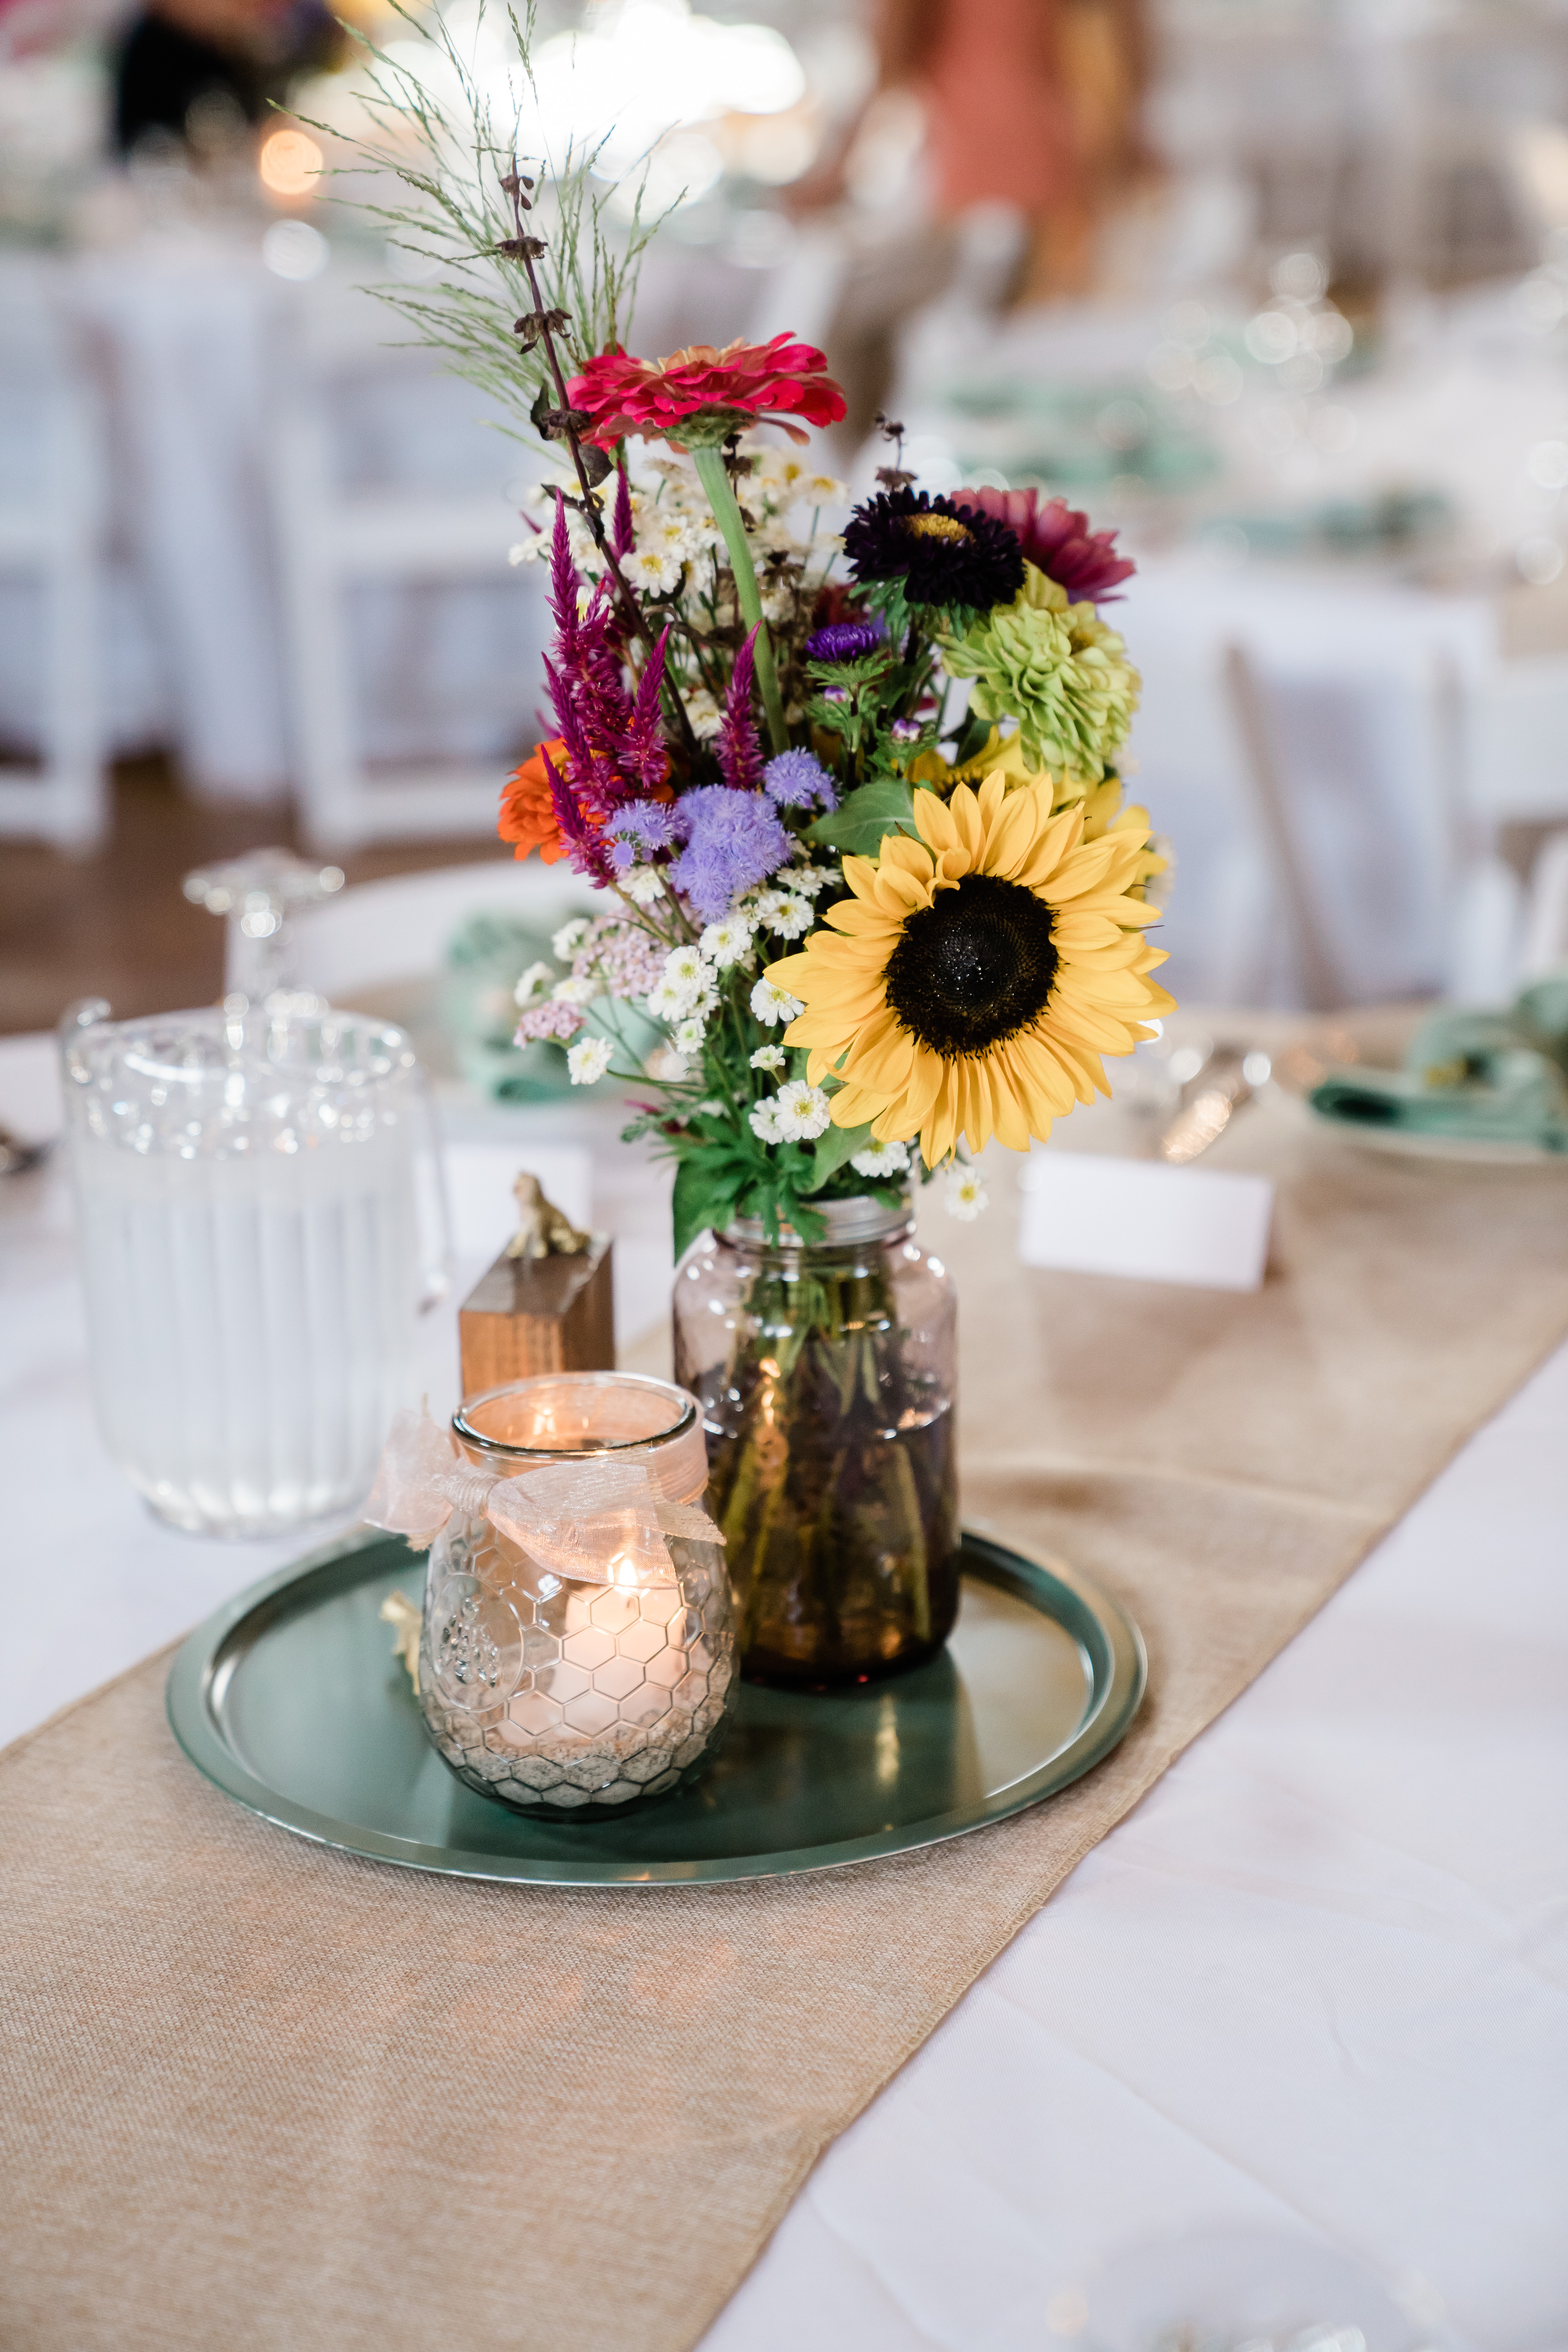 wedding centerpieces with sunflowers in glass jars